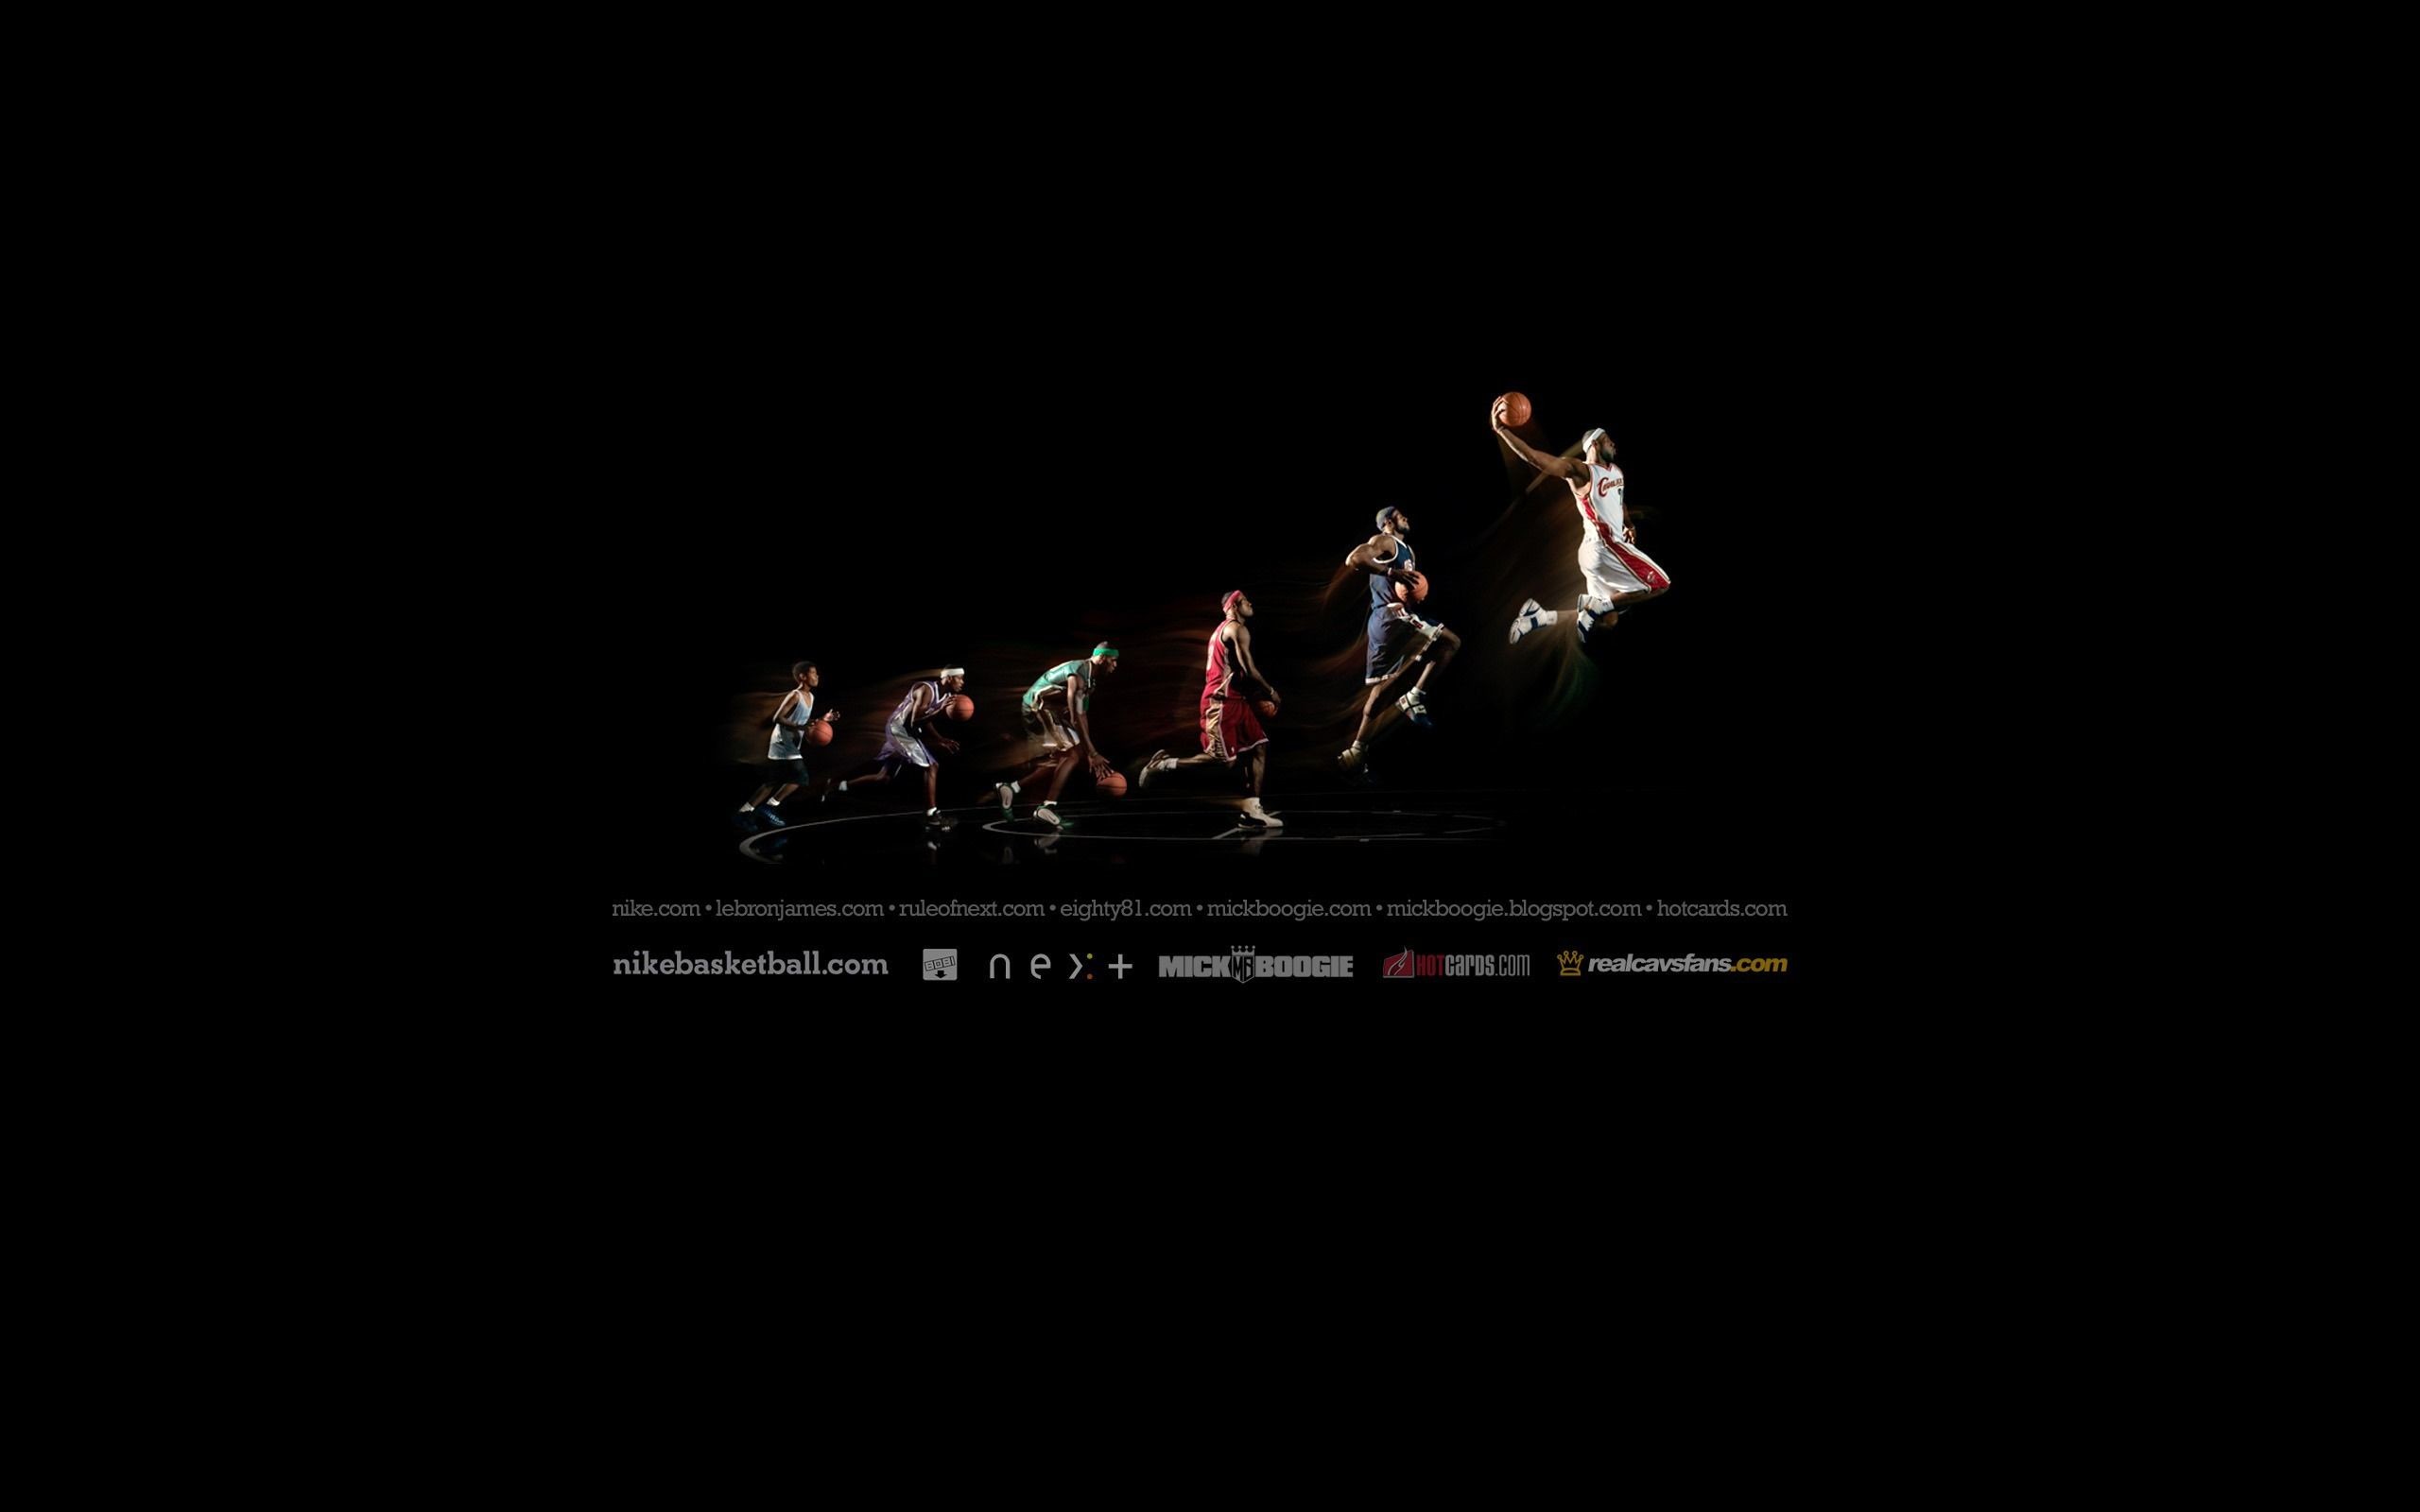 Nike Basketball Wallpapers Widescreen with HD Wallpaper Resolution px 81.30 KB Sport Girls Nike Wallpapers